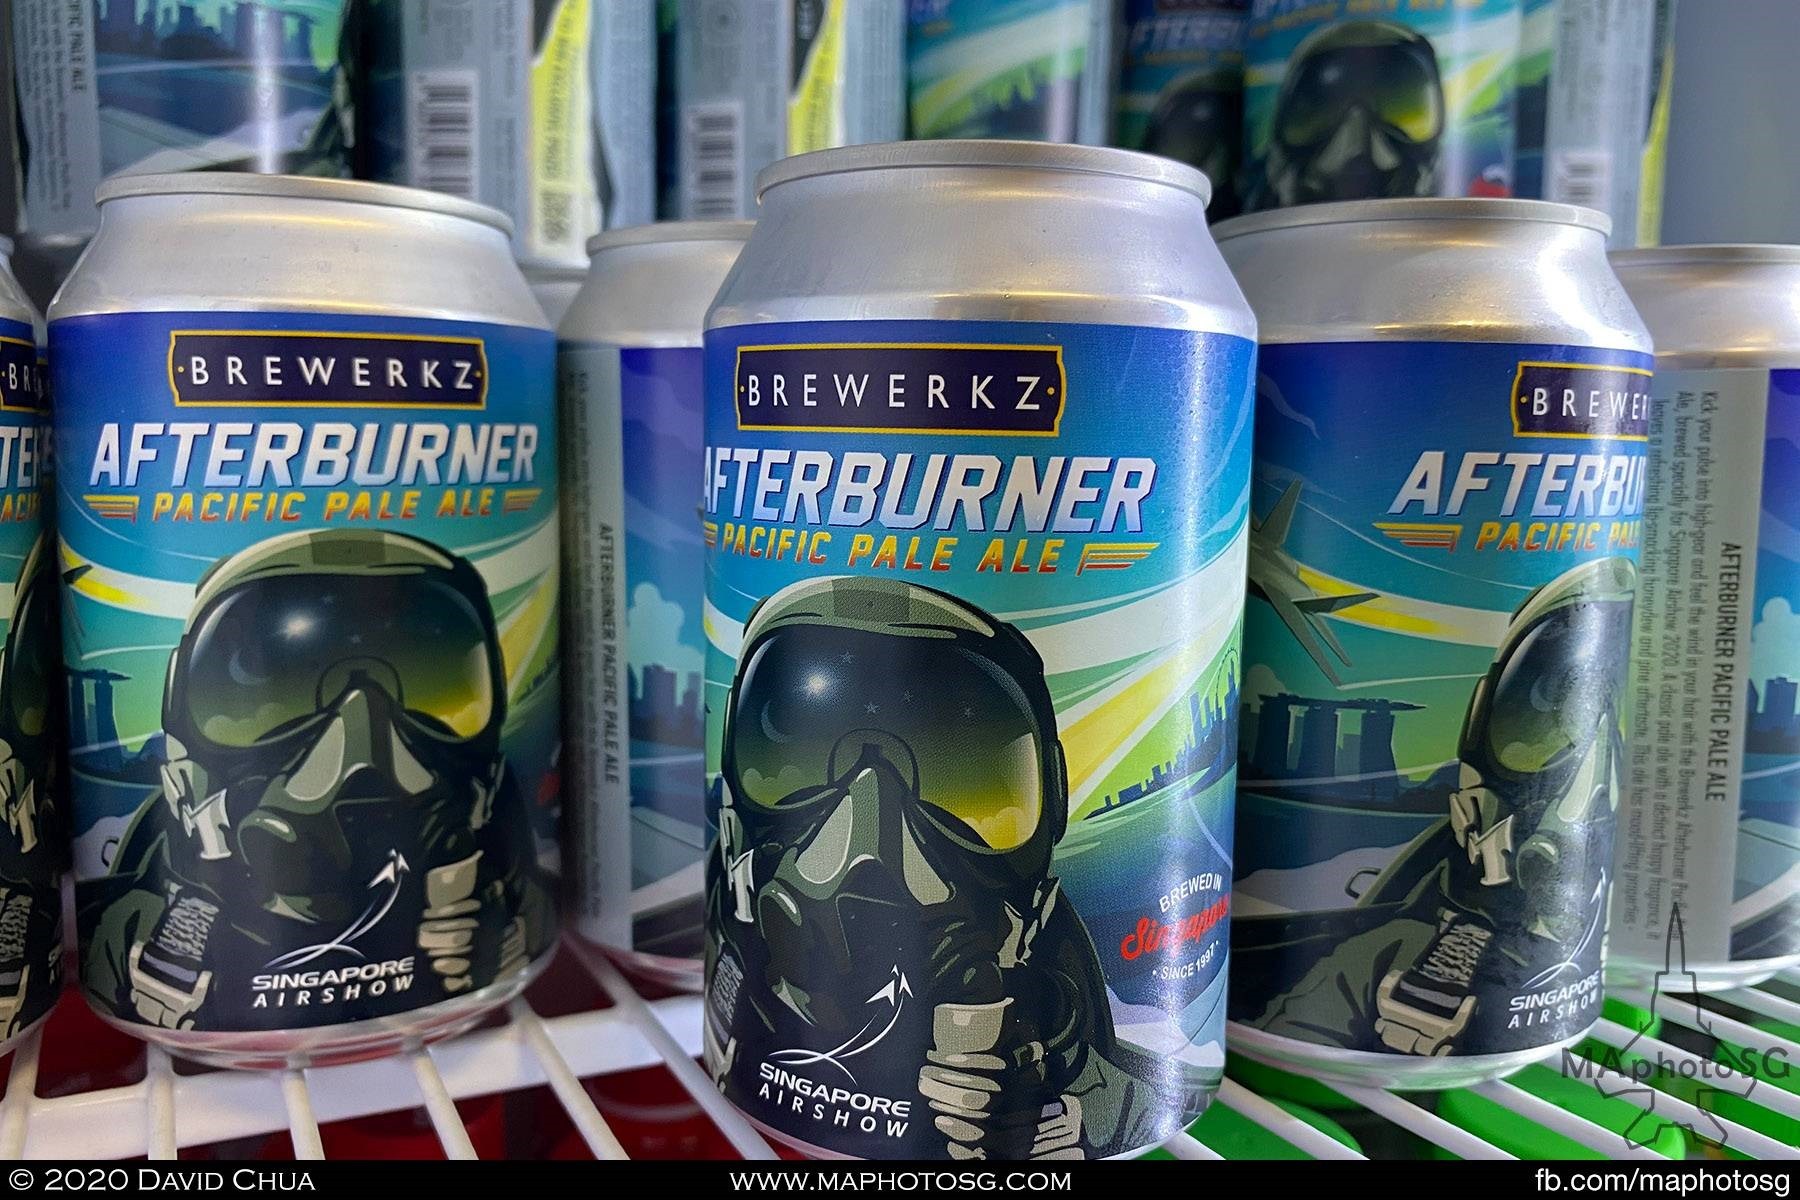 Special Afterburner beer from Brewerkz for the Singapore Airshow 2020